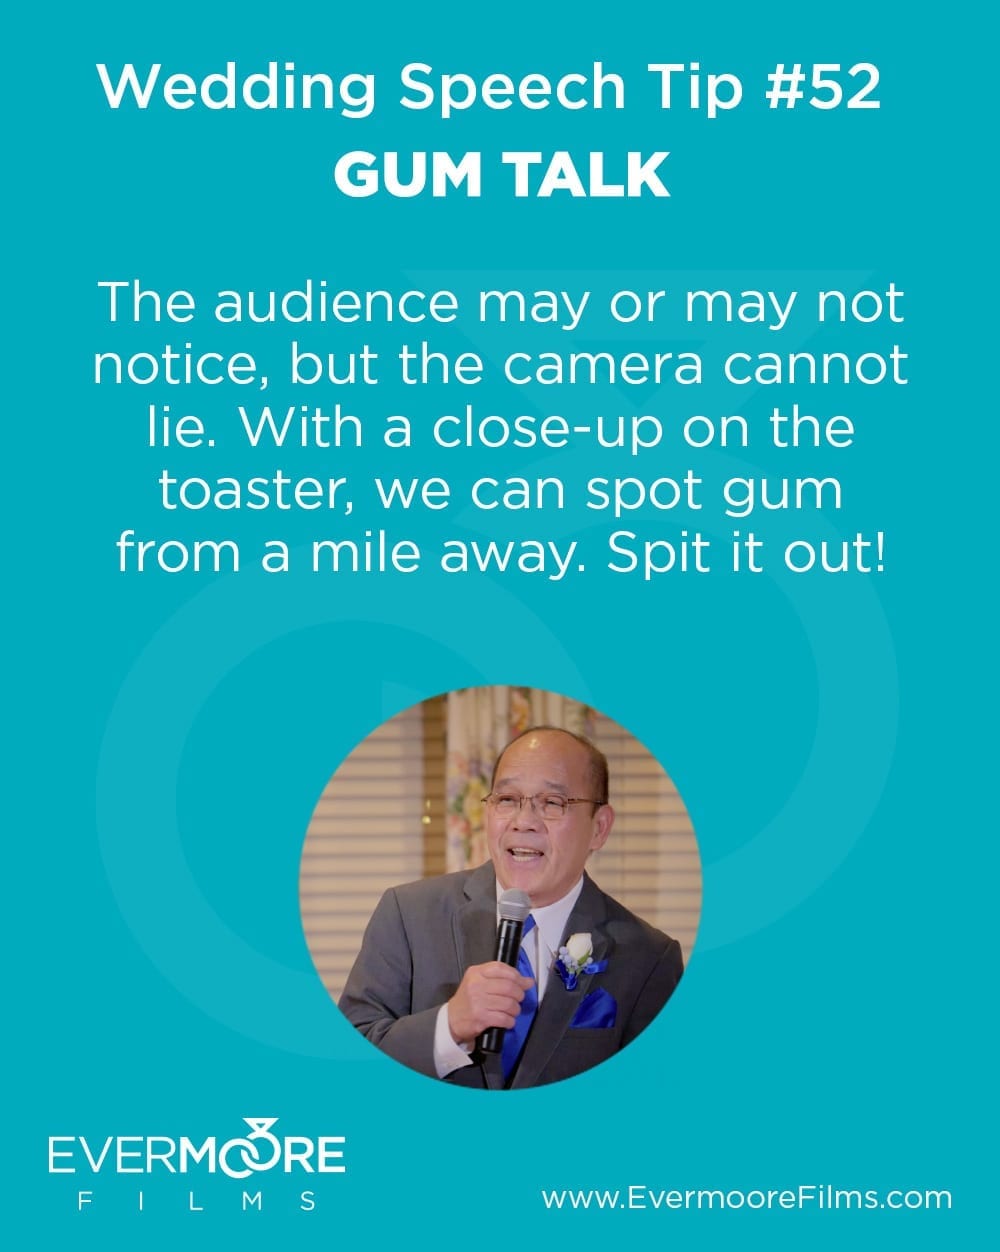 Gum Talk | Wedding Speech Tip #52 | The audience may or may not notice, but the camera cannot lie. With a close-up on the toaster, we can spot gum from a mile away. Spit it out!